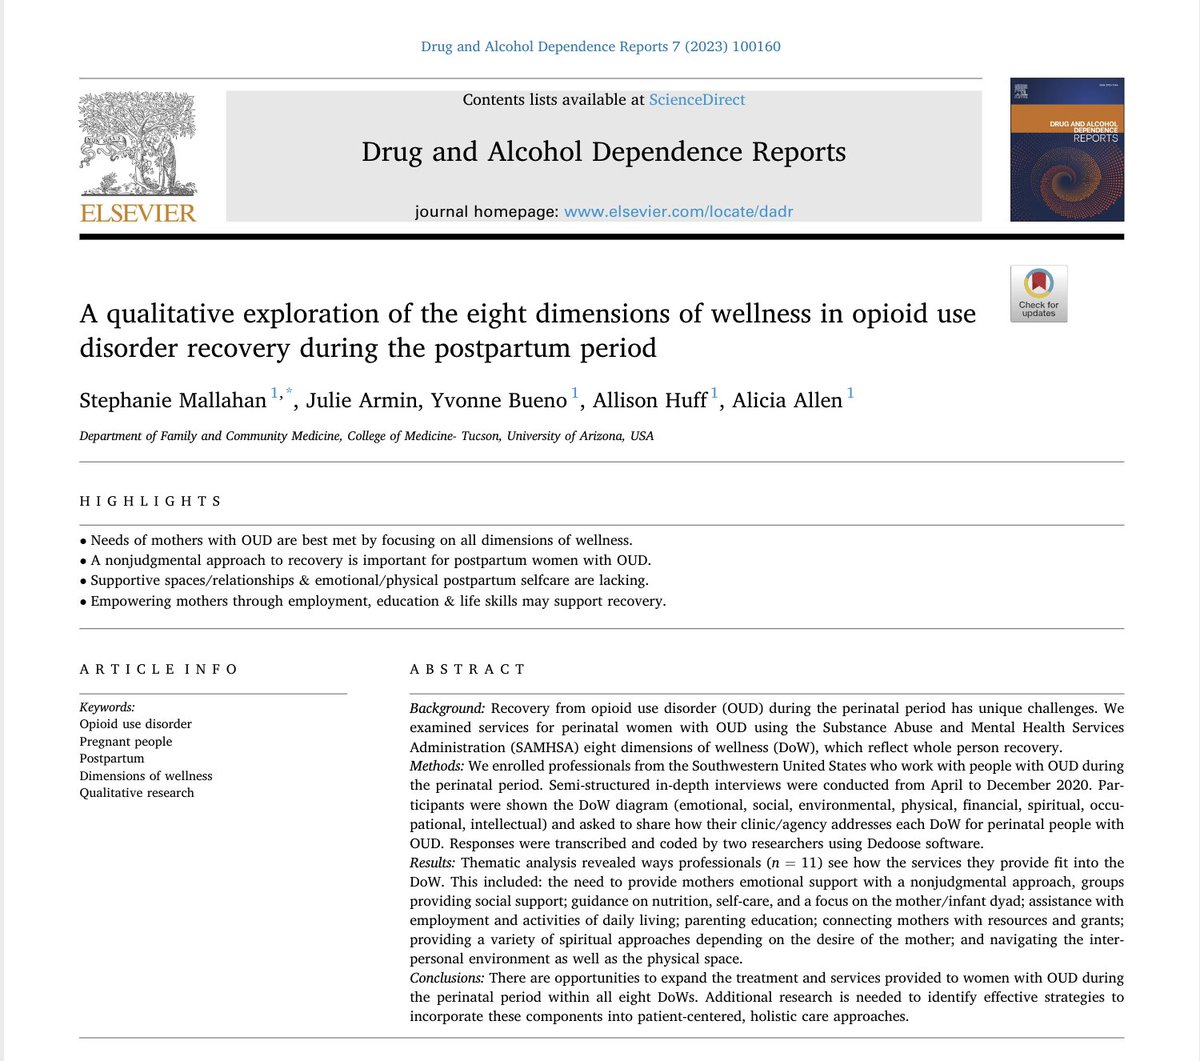 New DADR study highlights how whole-person approach can enhance treatment for perinatal women with OUD. Focus on emotional support, social networks. More research needed for patient-centered care. #OpioidRecovery #PerinatalHealth

tinyurl.com/4pccvyef